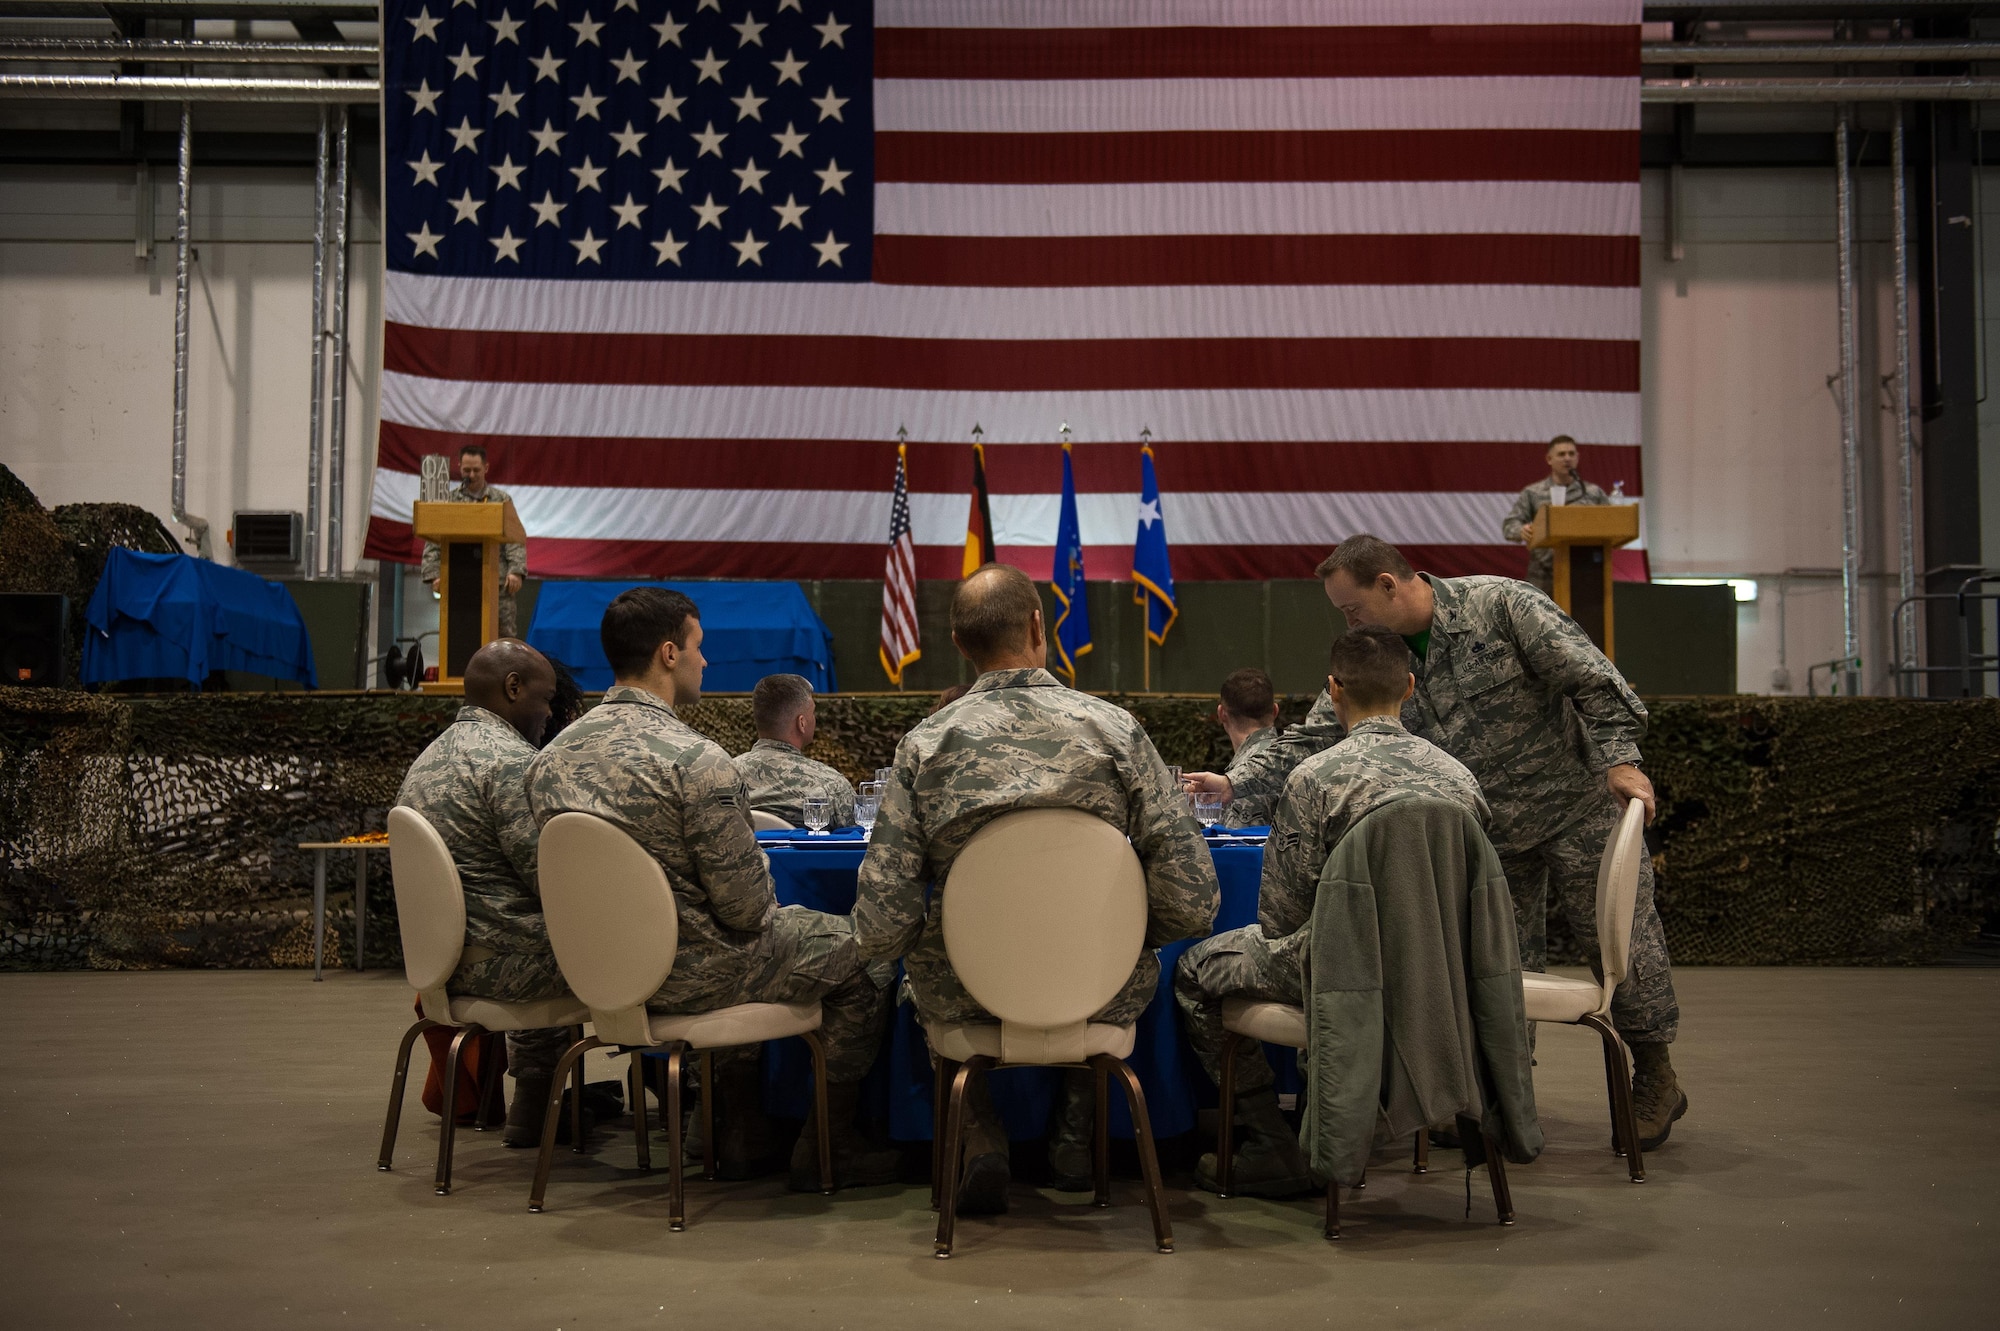 Airmen sit down at a table around Lt. Gen. John B. Cooper, headquarters U.S. Air Force deputy chief of staff for logistics, engineering and force protection, during the 2016 Maintenance and Logistics Airmen Annual Award Ceremony on Ramstein Air Base, Germany, Feb. 17, 2017. Cooper joined Airmen who received annual awards on stage to reward them for their hard work throughout 2016. (U.S. Air Force photo by Senior Airman Lane T. Plummer)